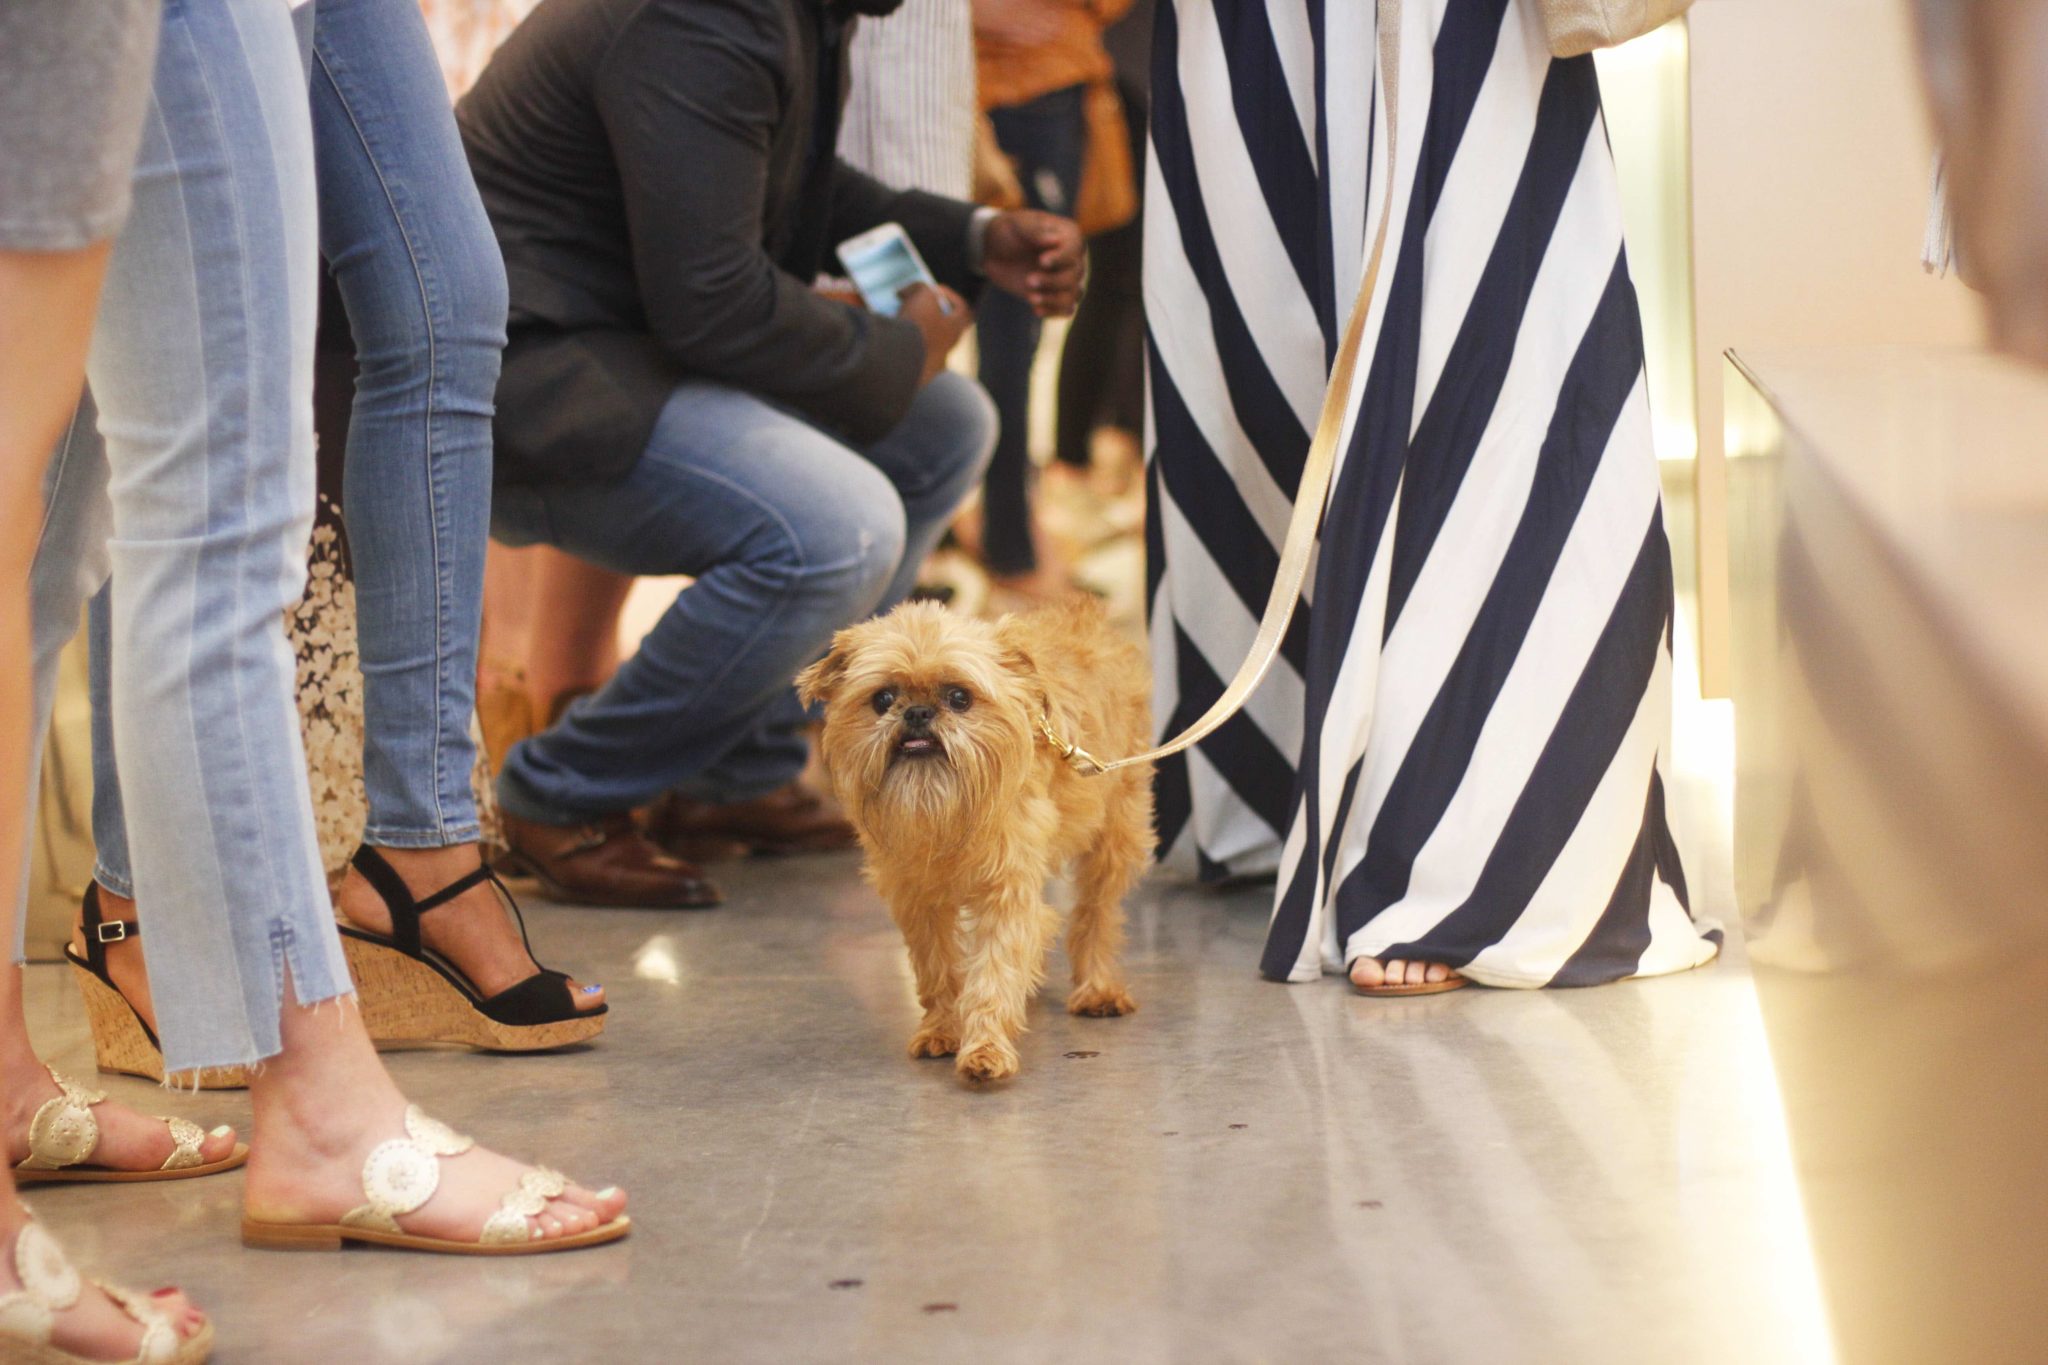 Event recap from the PAWsh Puppy Fashion Show with Kelly Wynne Handbags. Steven Jalapeño and 5 other dogs participated in the Austin Pets Alive runway way show. Click for more info and pictures.